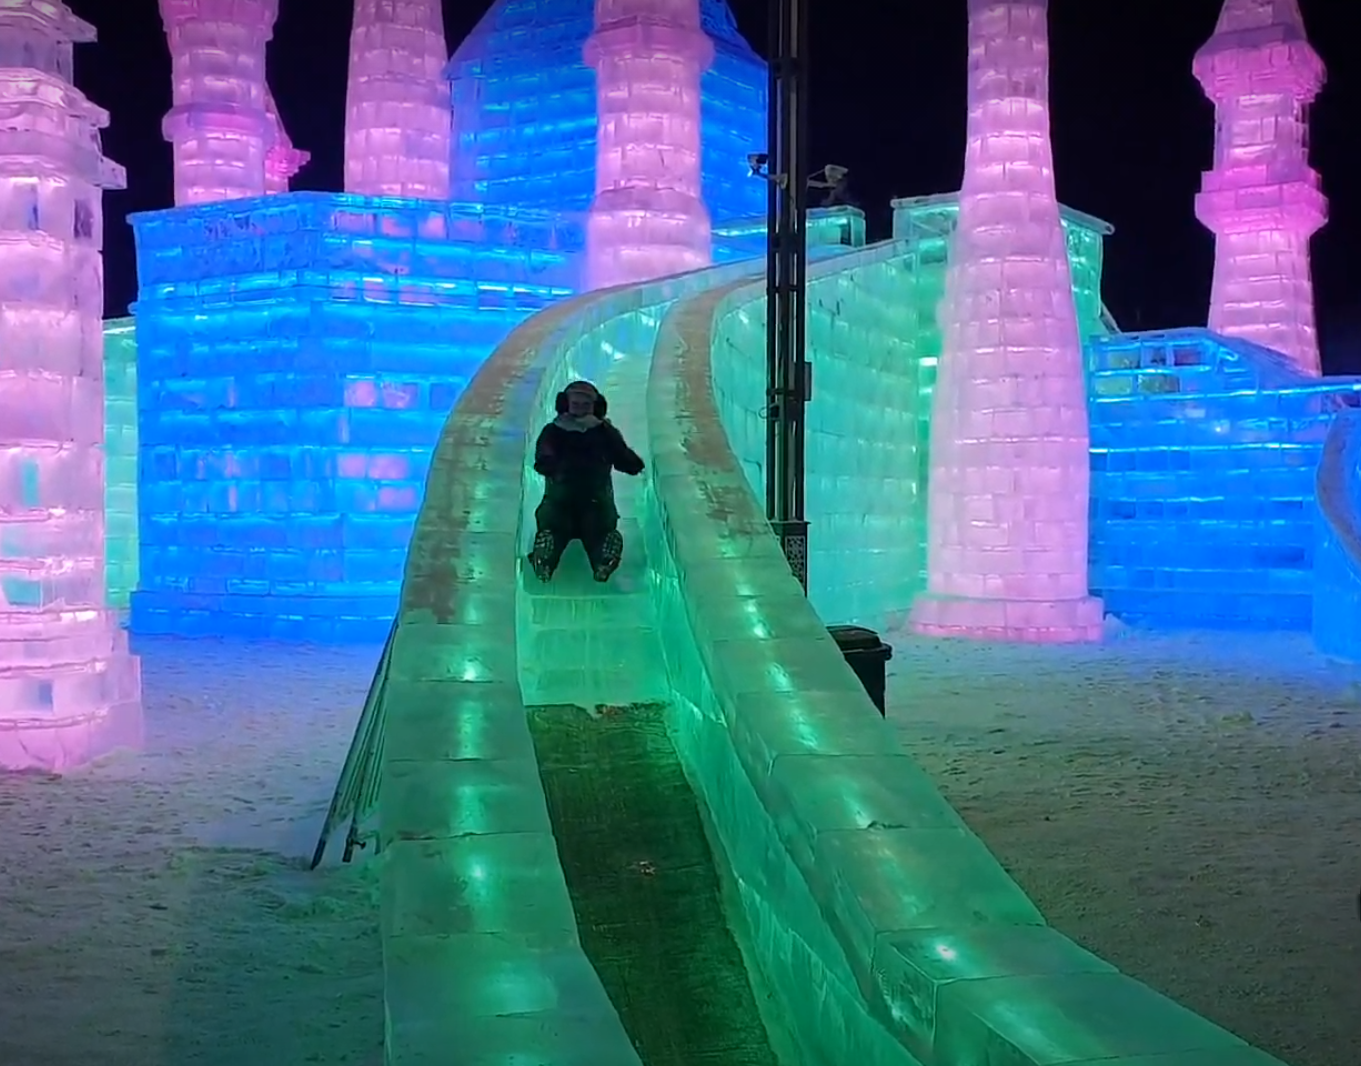 Rosie on a green ice slide at Harbin Ice and Snow World